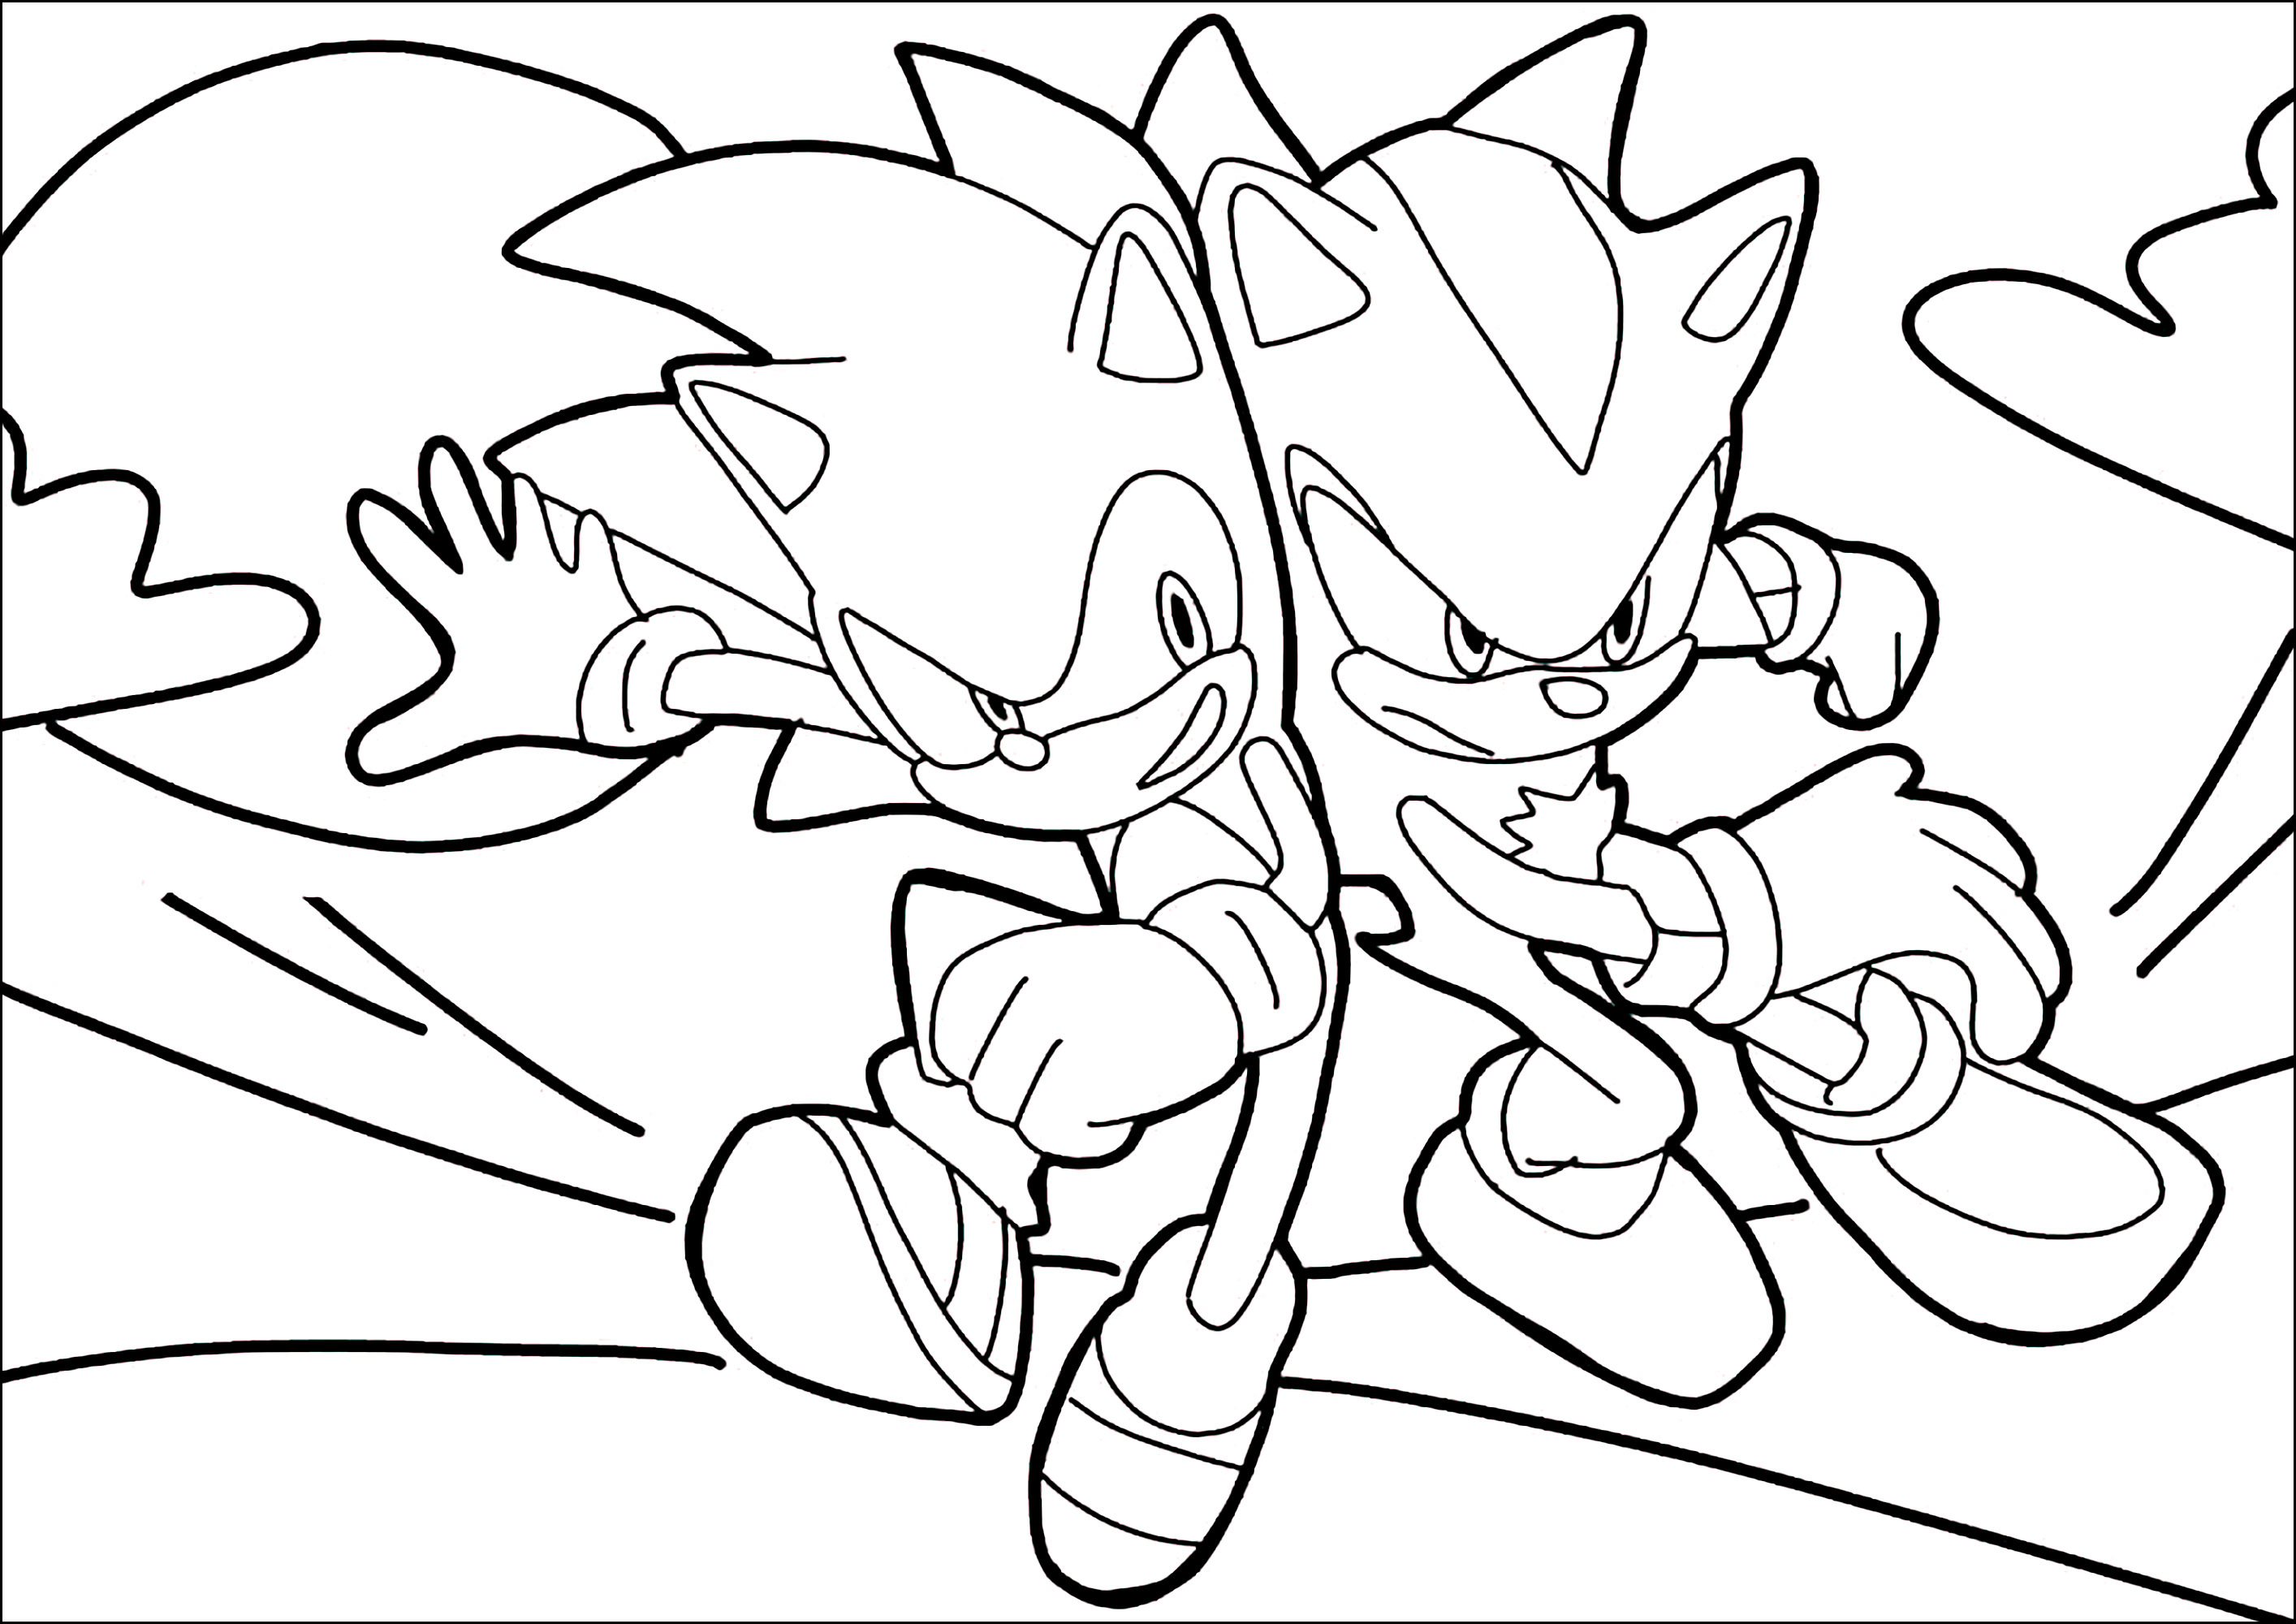 Shadow the hedgehog with Sonic